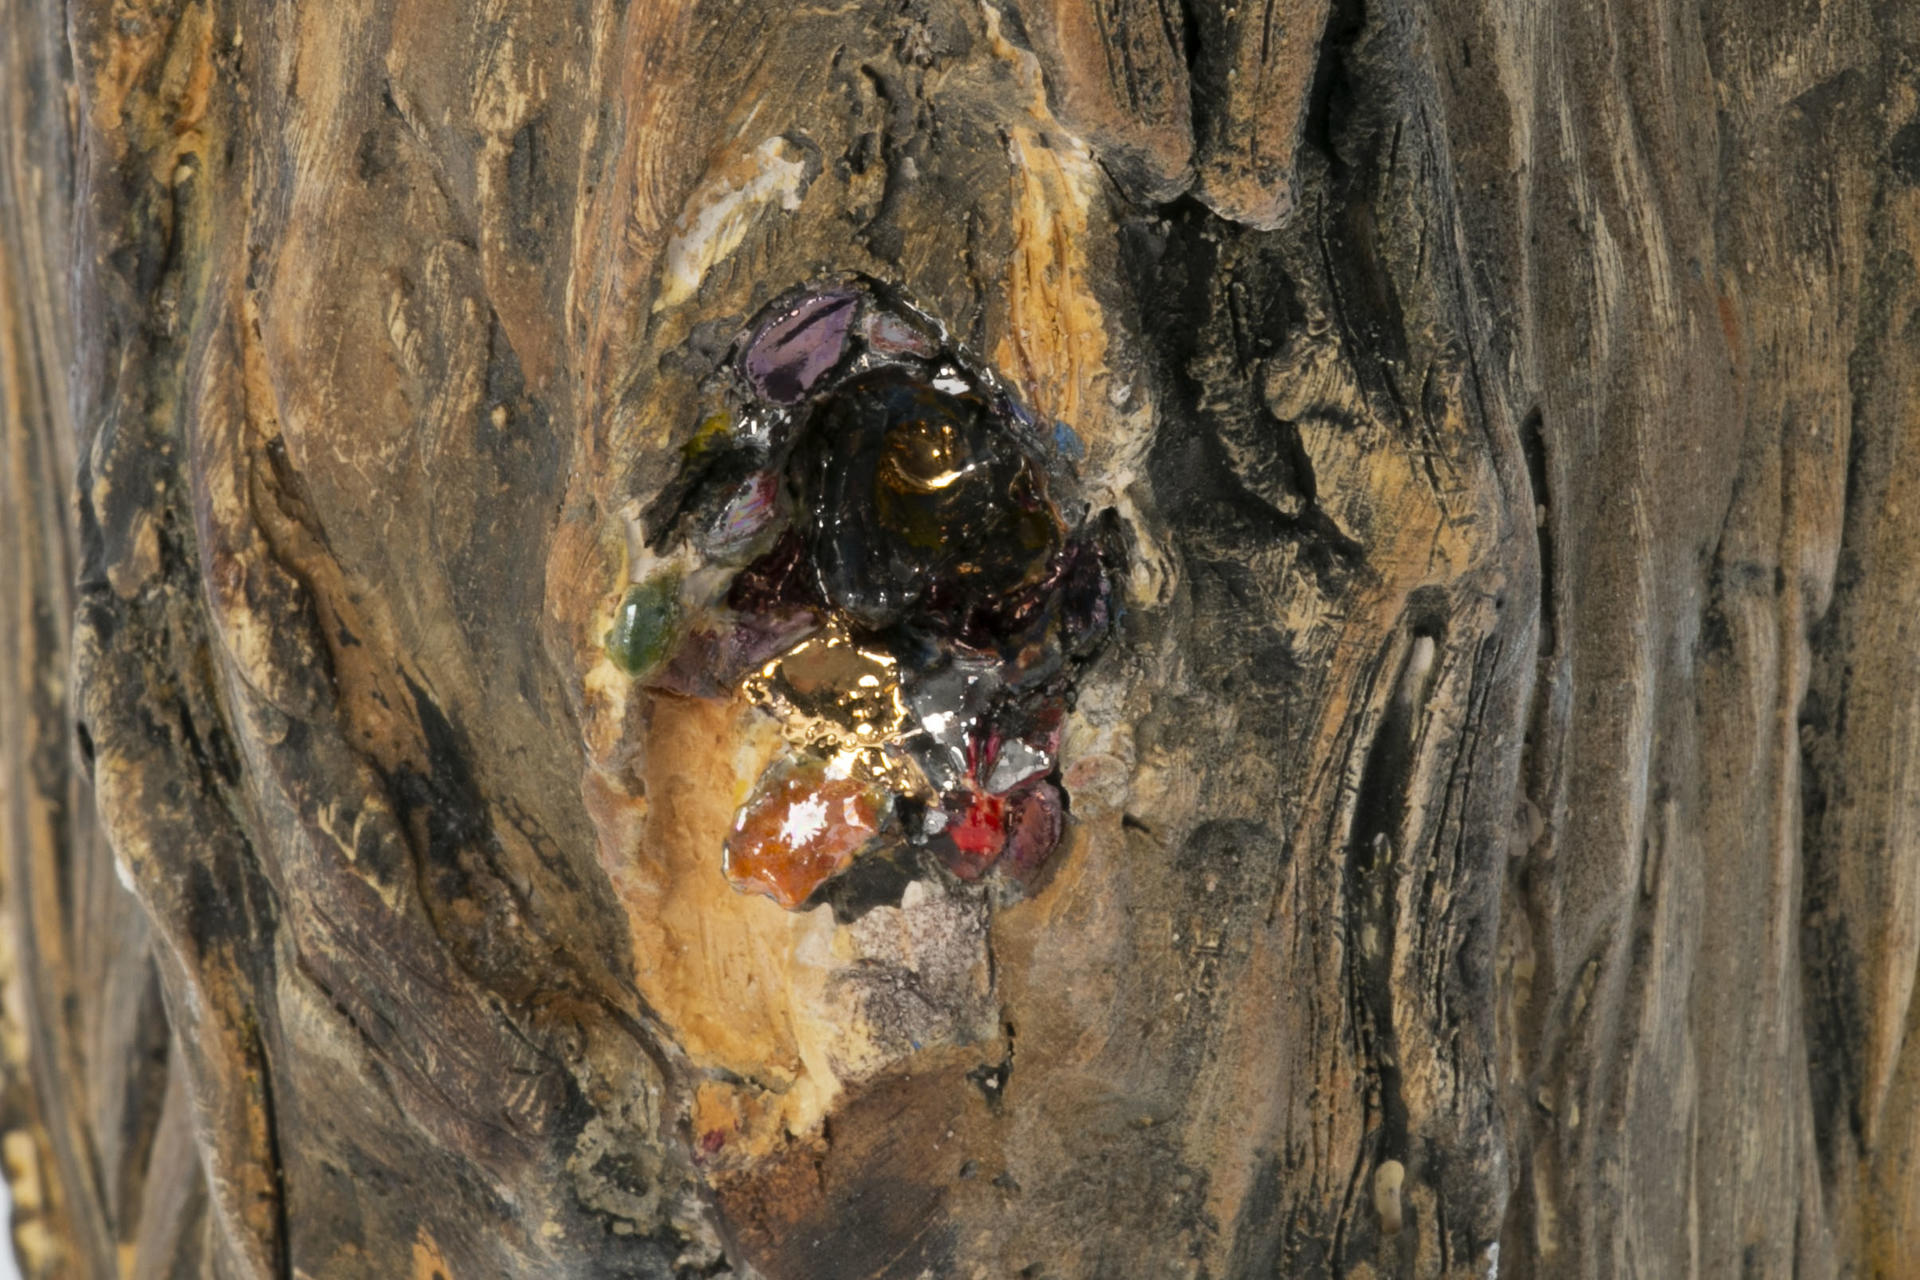 Detail of ceramic firewood sculpture depicting hole with sparkling confetti spilling out in wood.